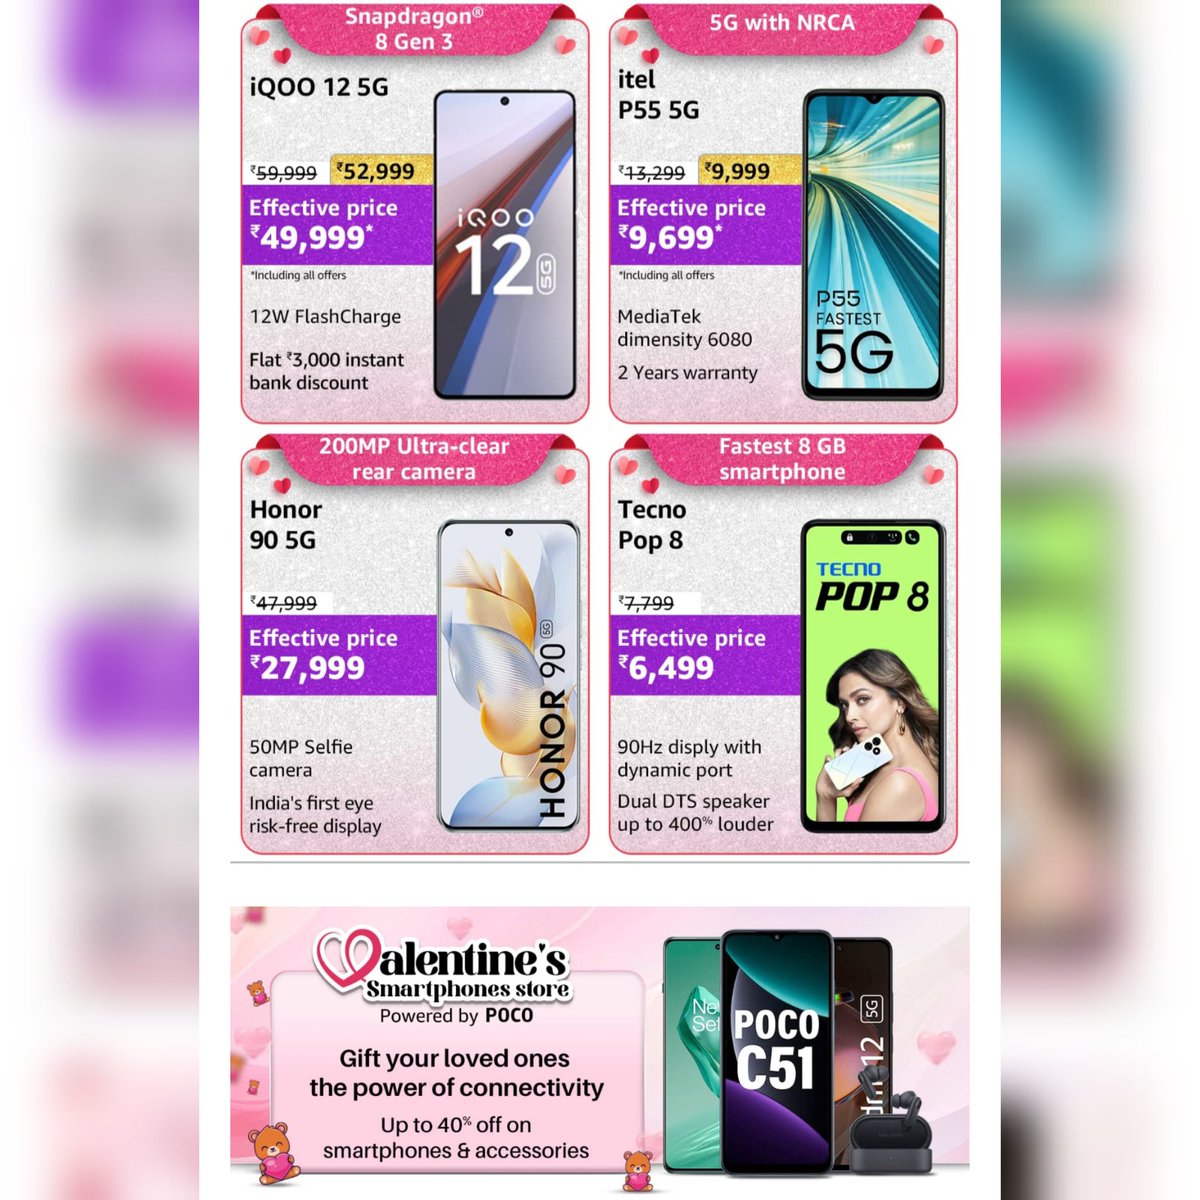 Amazon India - FAB Phone Fest is Live - Valentine's Day Spl Sale
(10th-14th Feb 2024)
Master Link - amzn.clnk.in/izOT

#smartphonedeals #mobiledeals
#smartphonesale #mobilesale
#amazonsmartphonesale